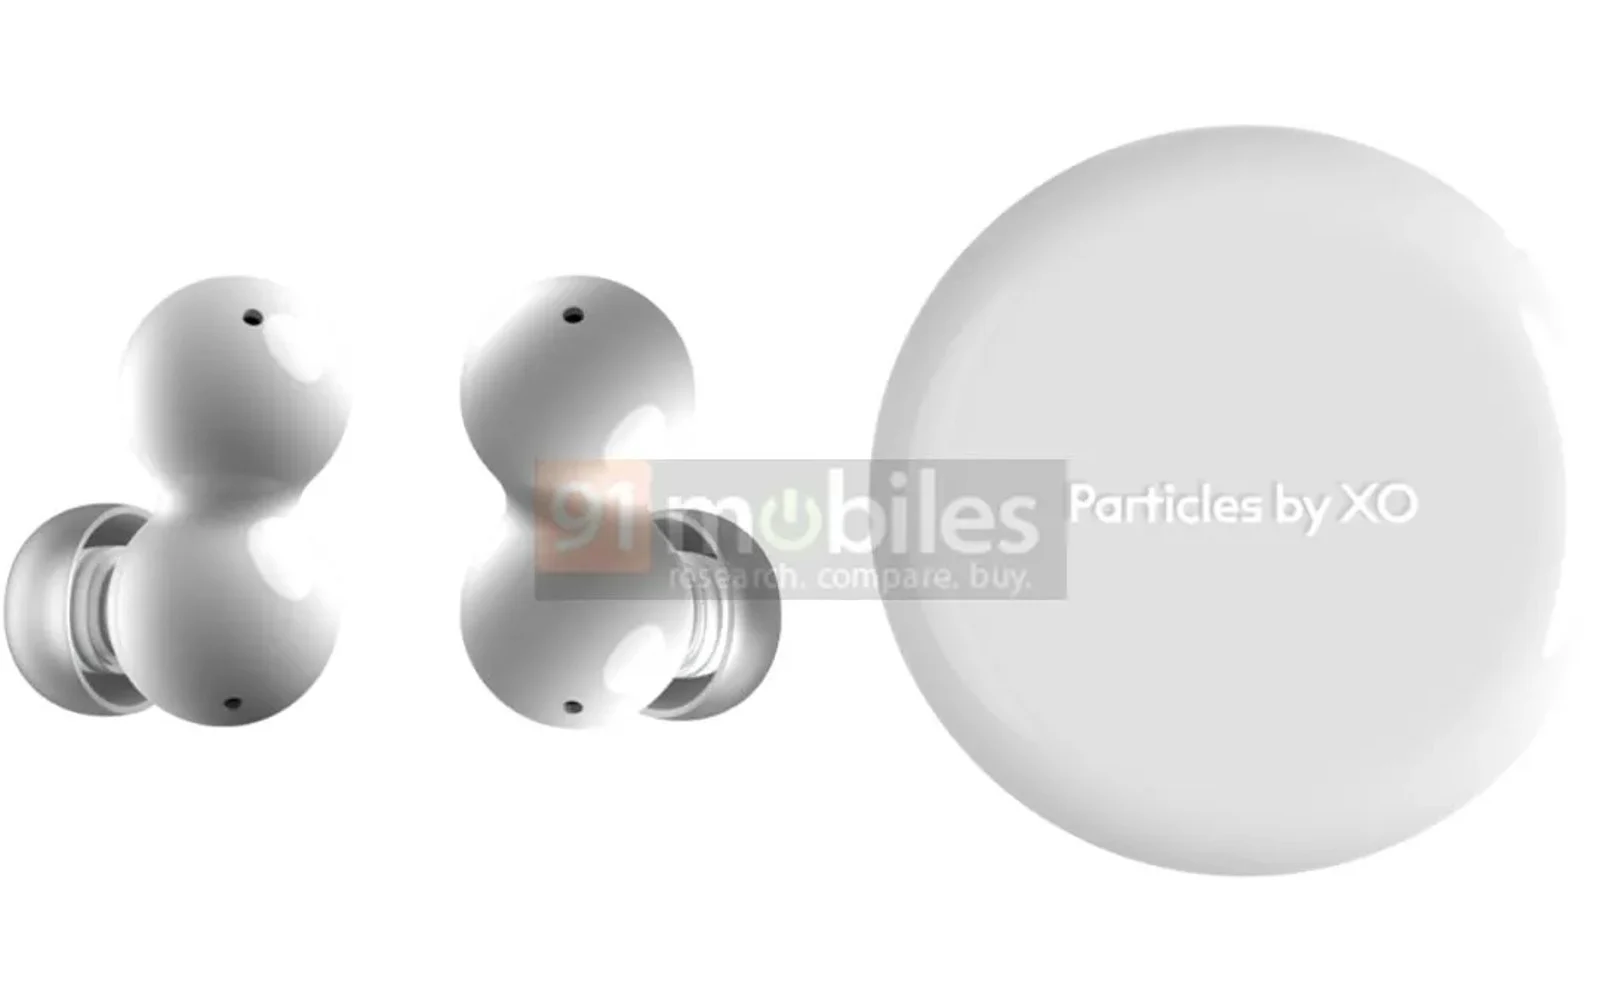 mobiles Particles by XO